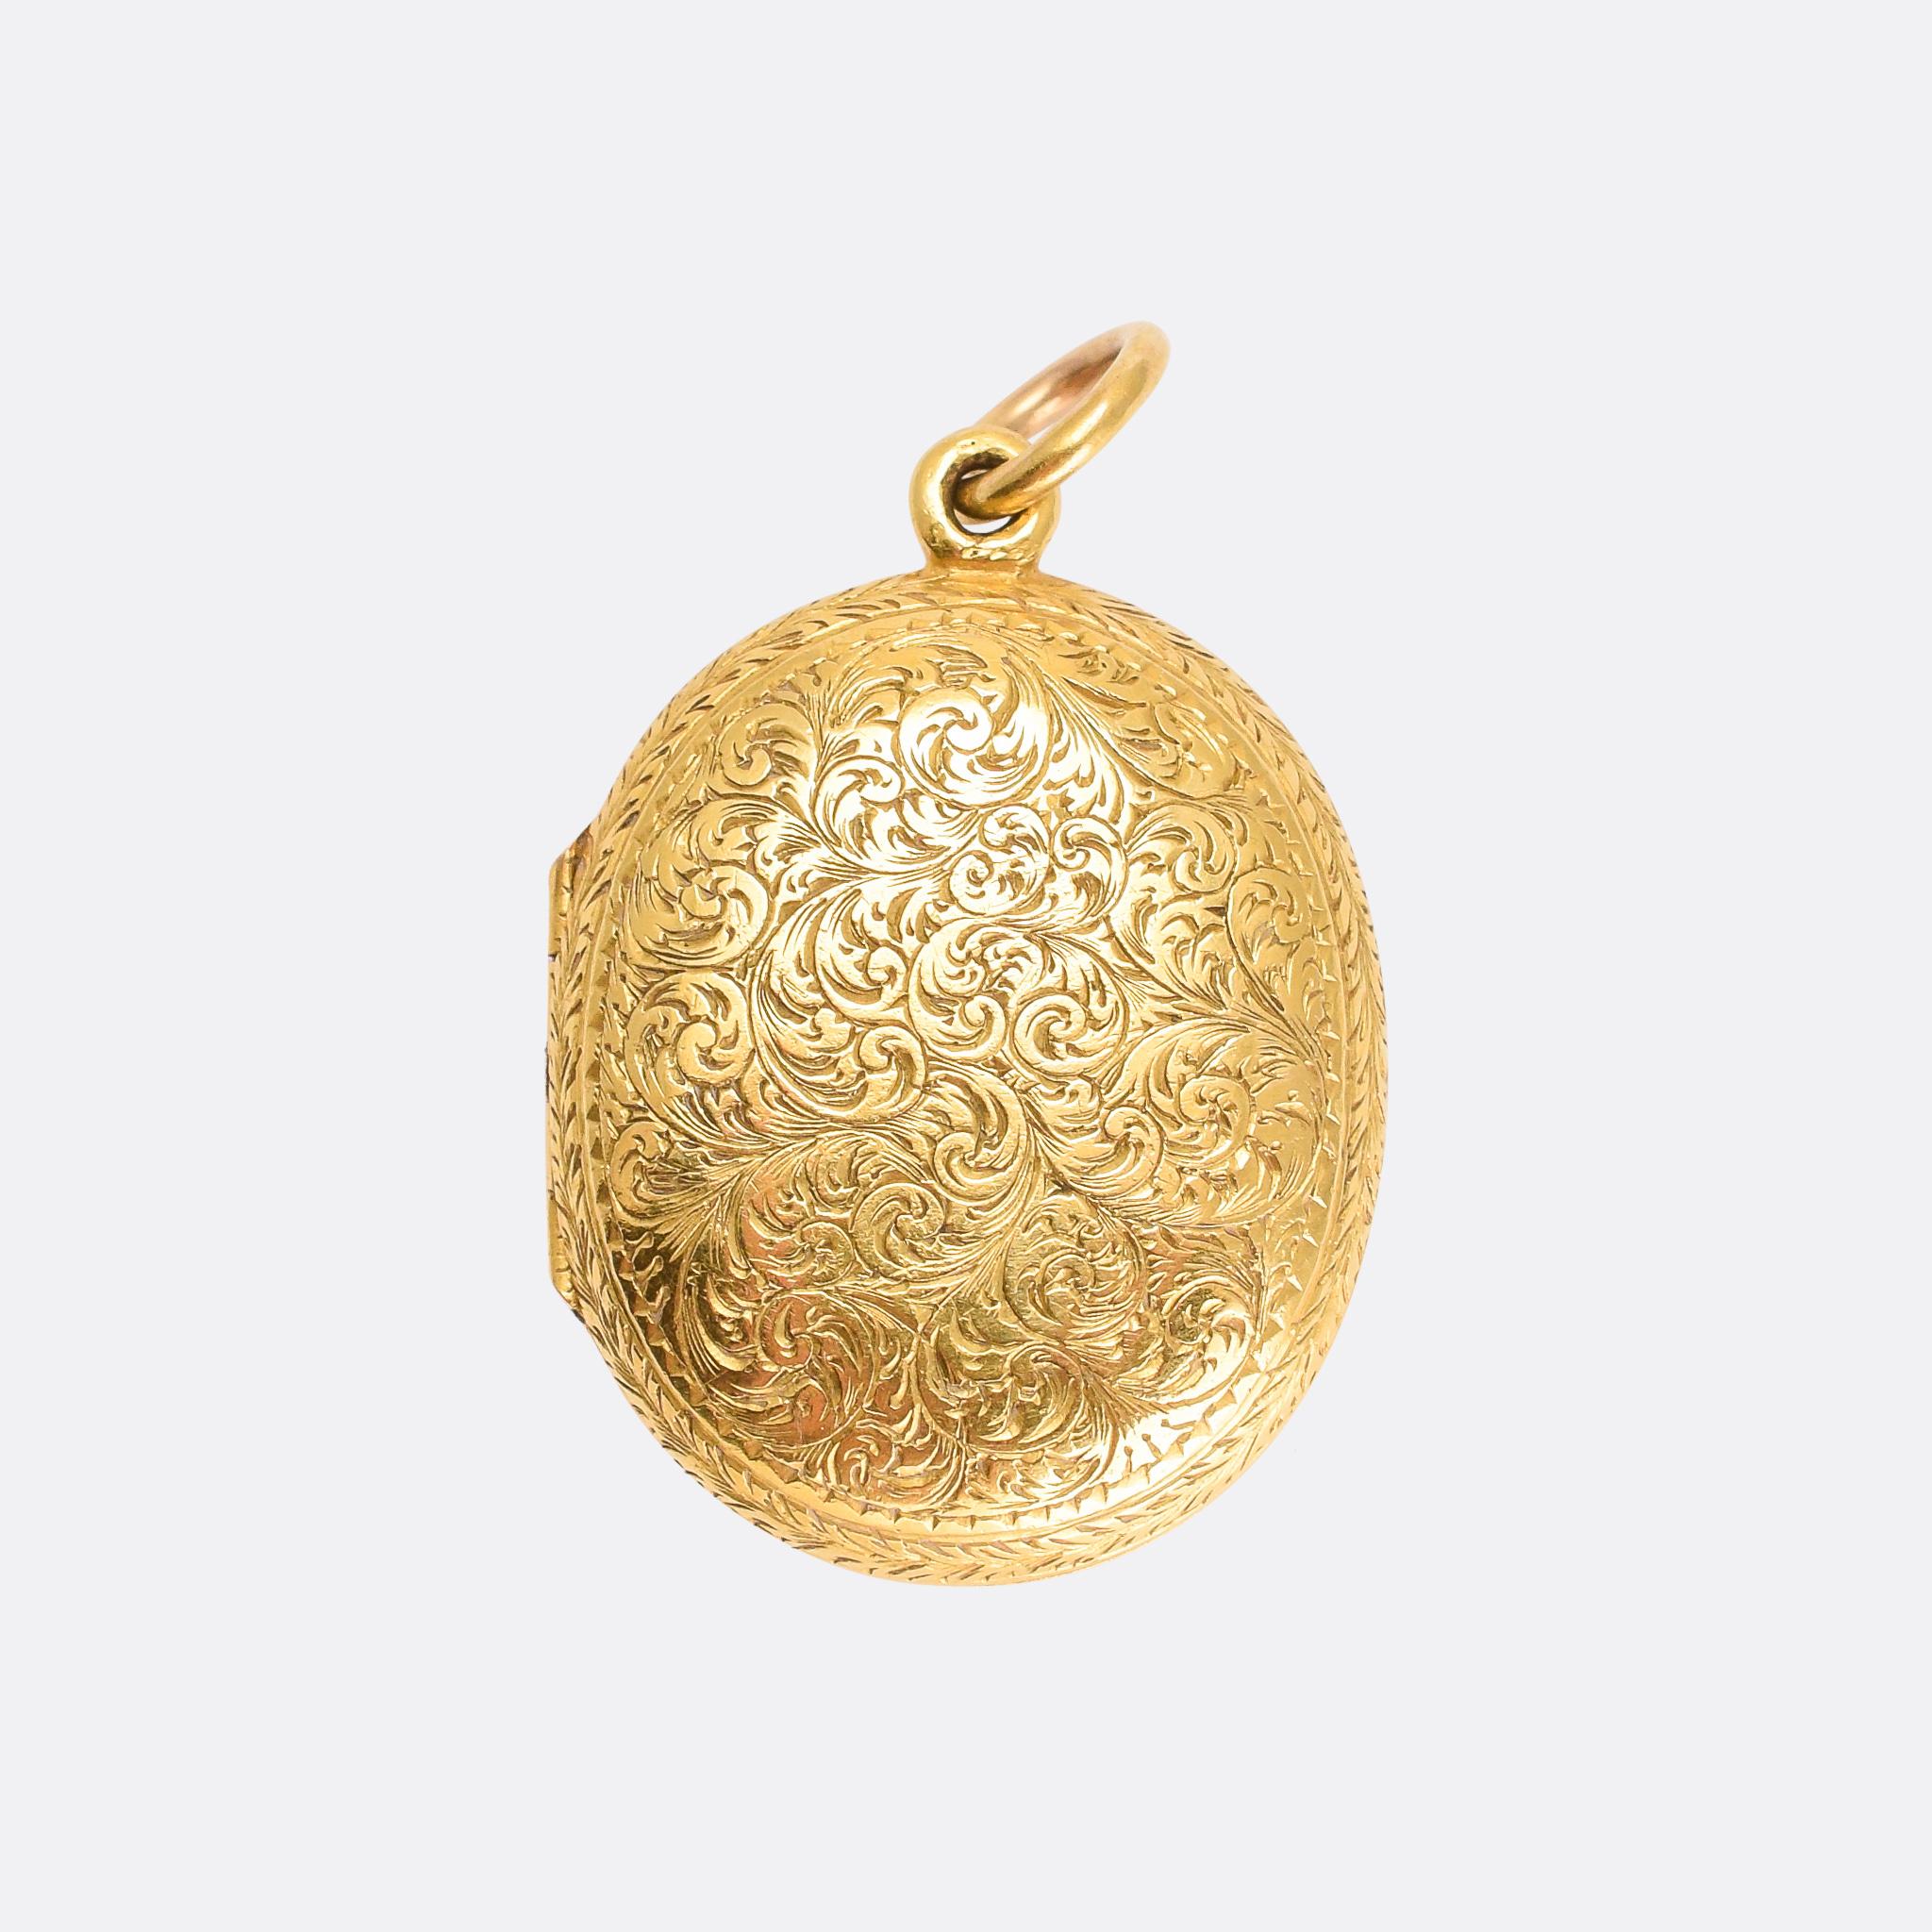 A cool Victorian gold locket that opens to reveal a 